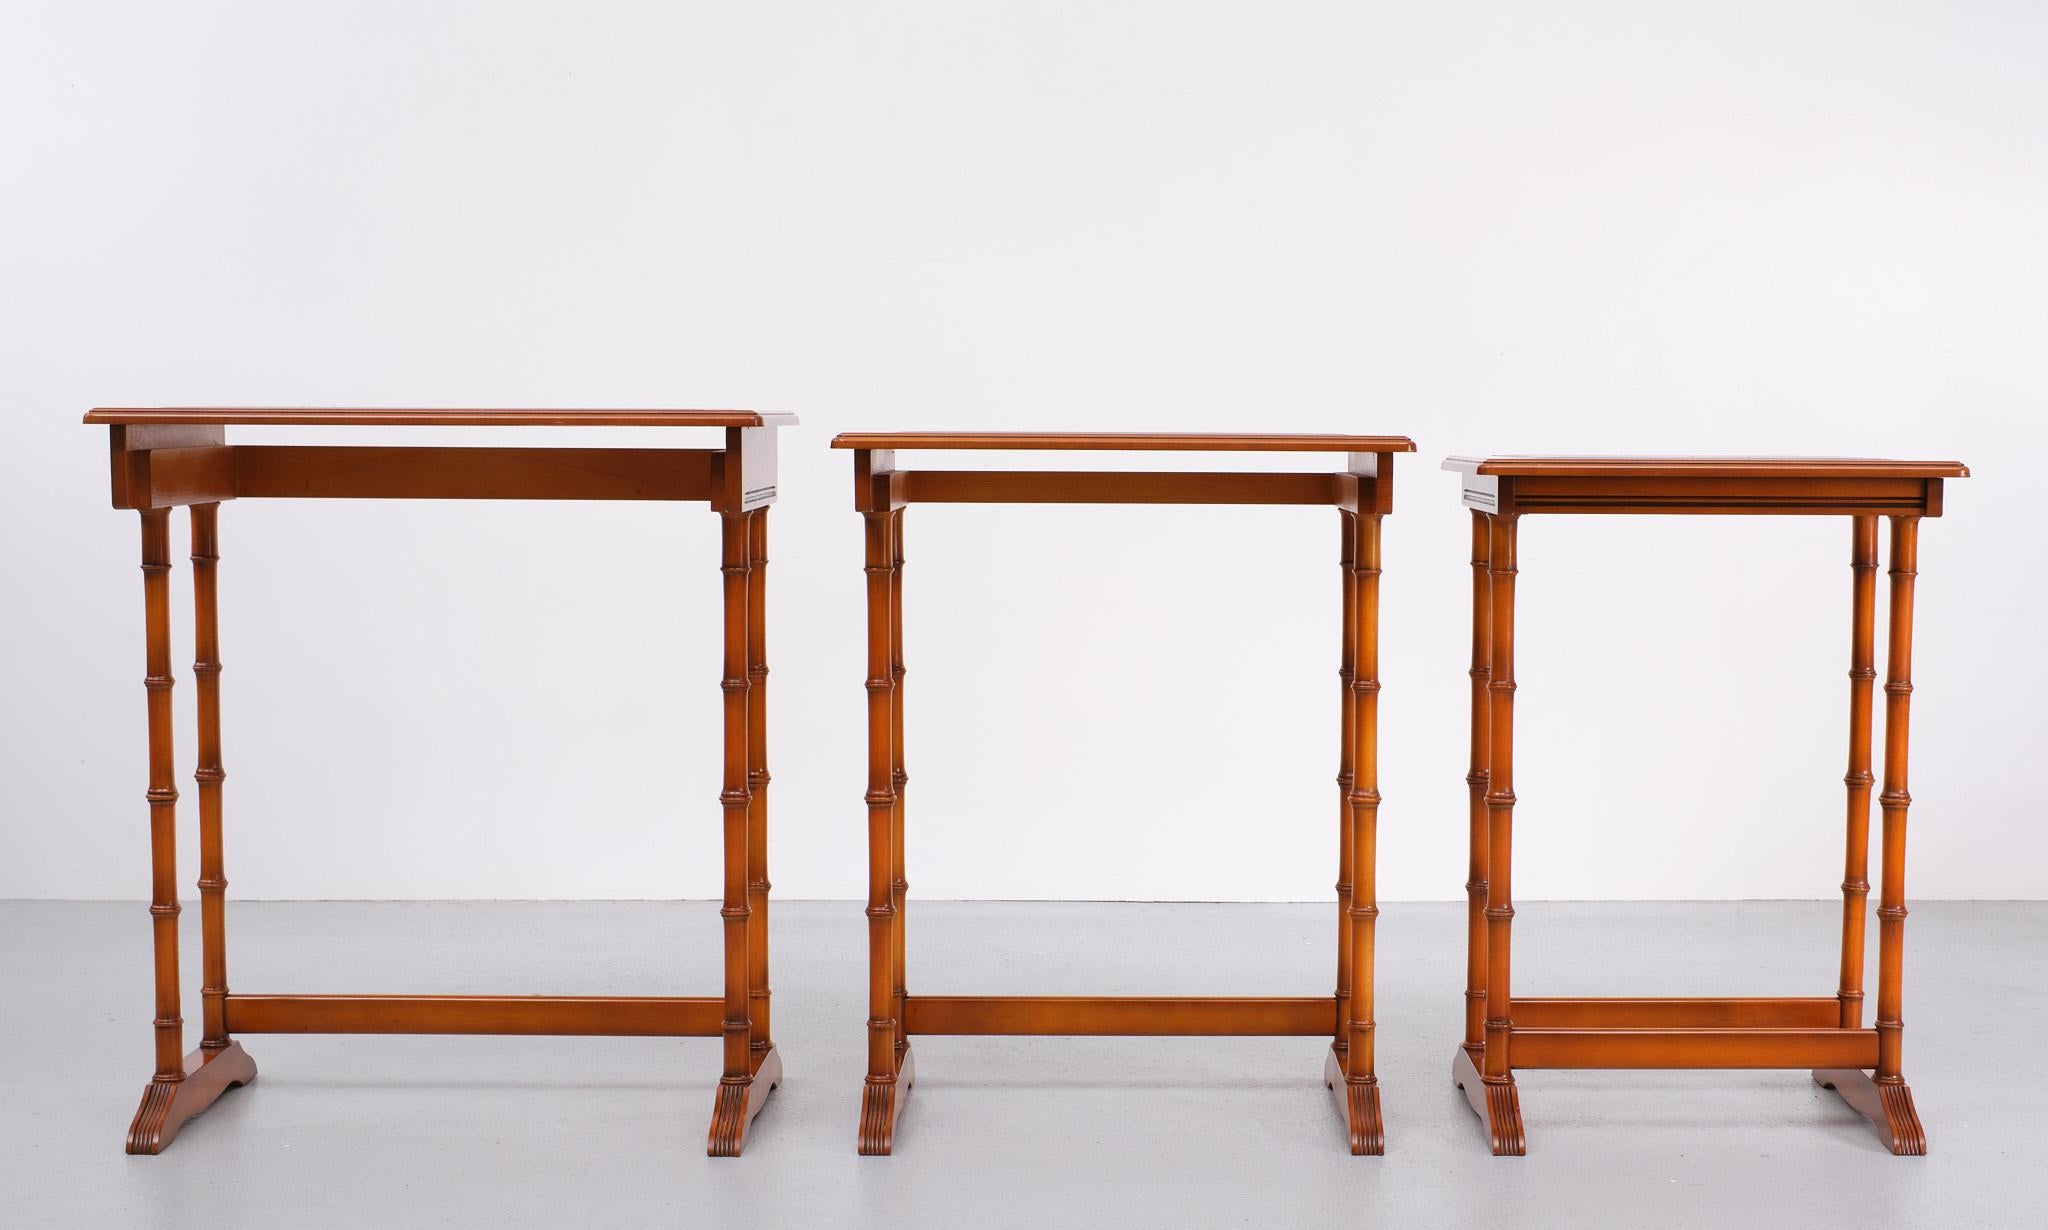   Exclusive English furniture  Cherry wood nesting tables  1970s  For Sale 8